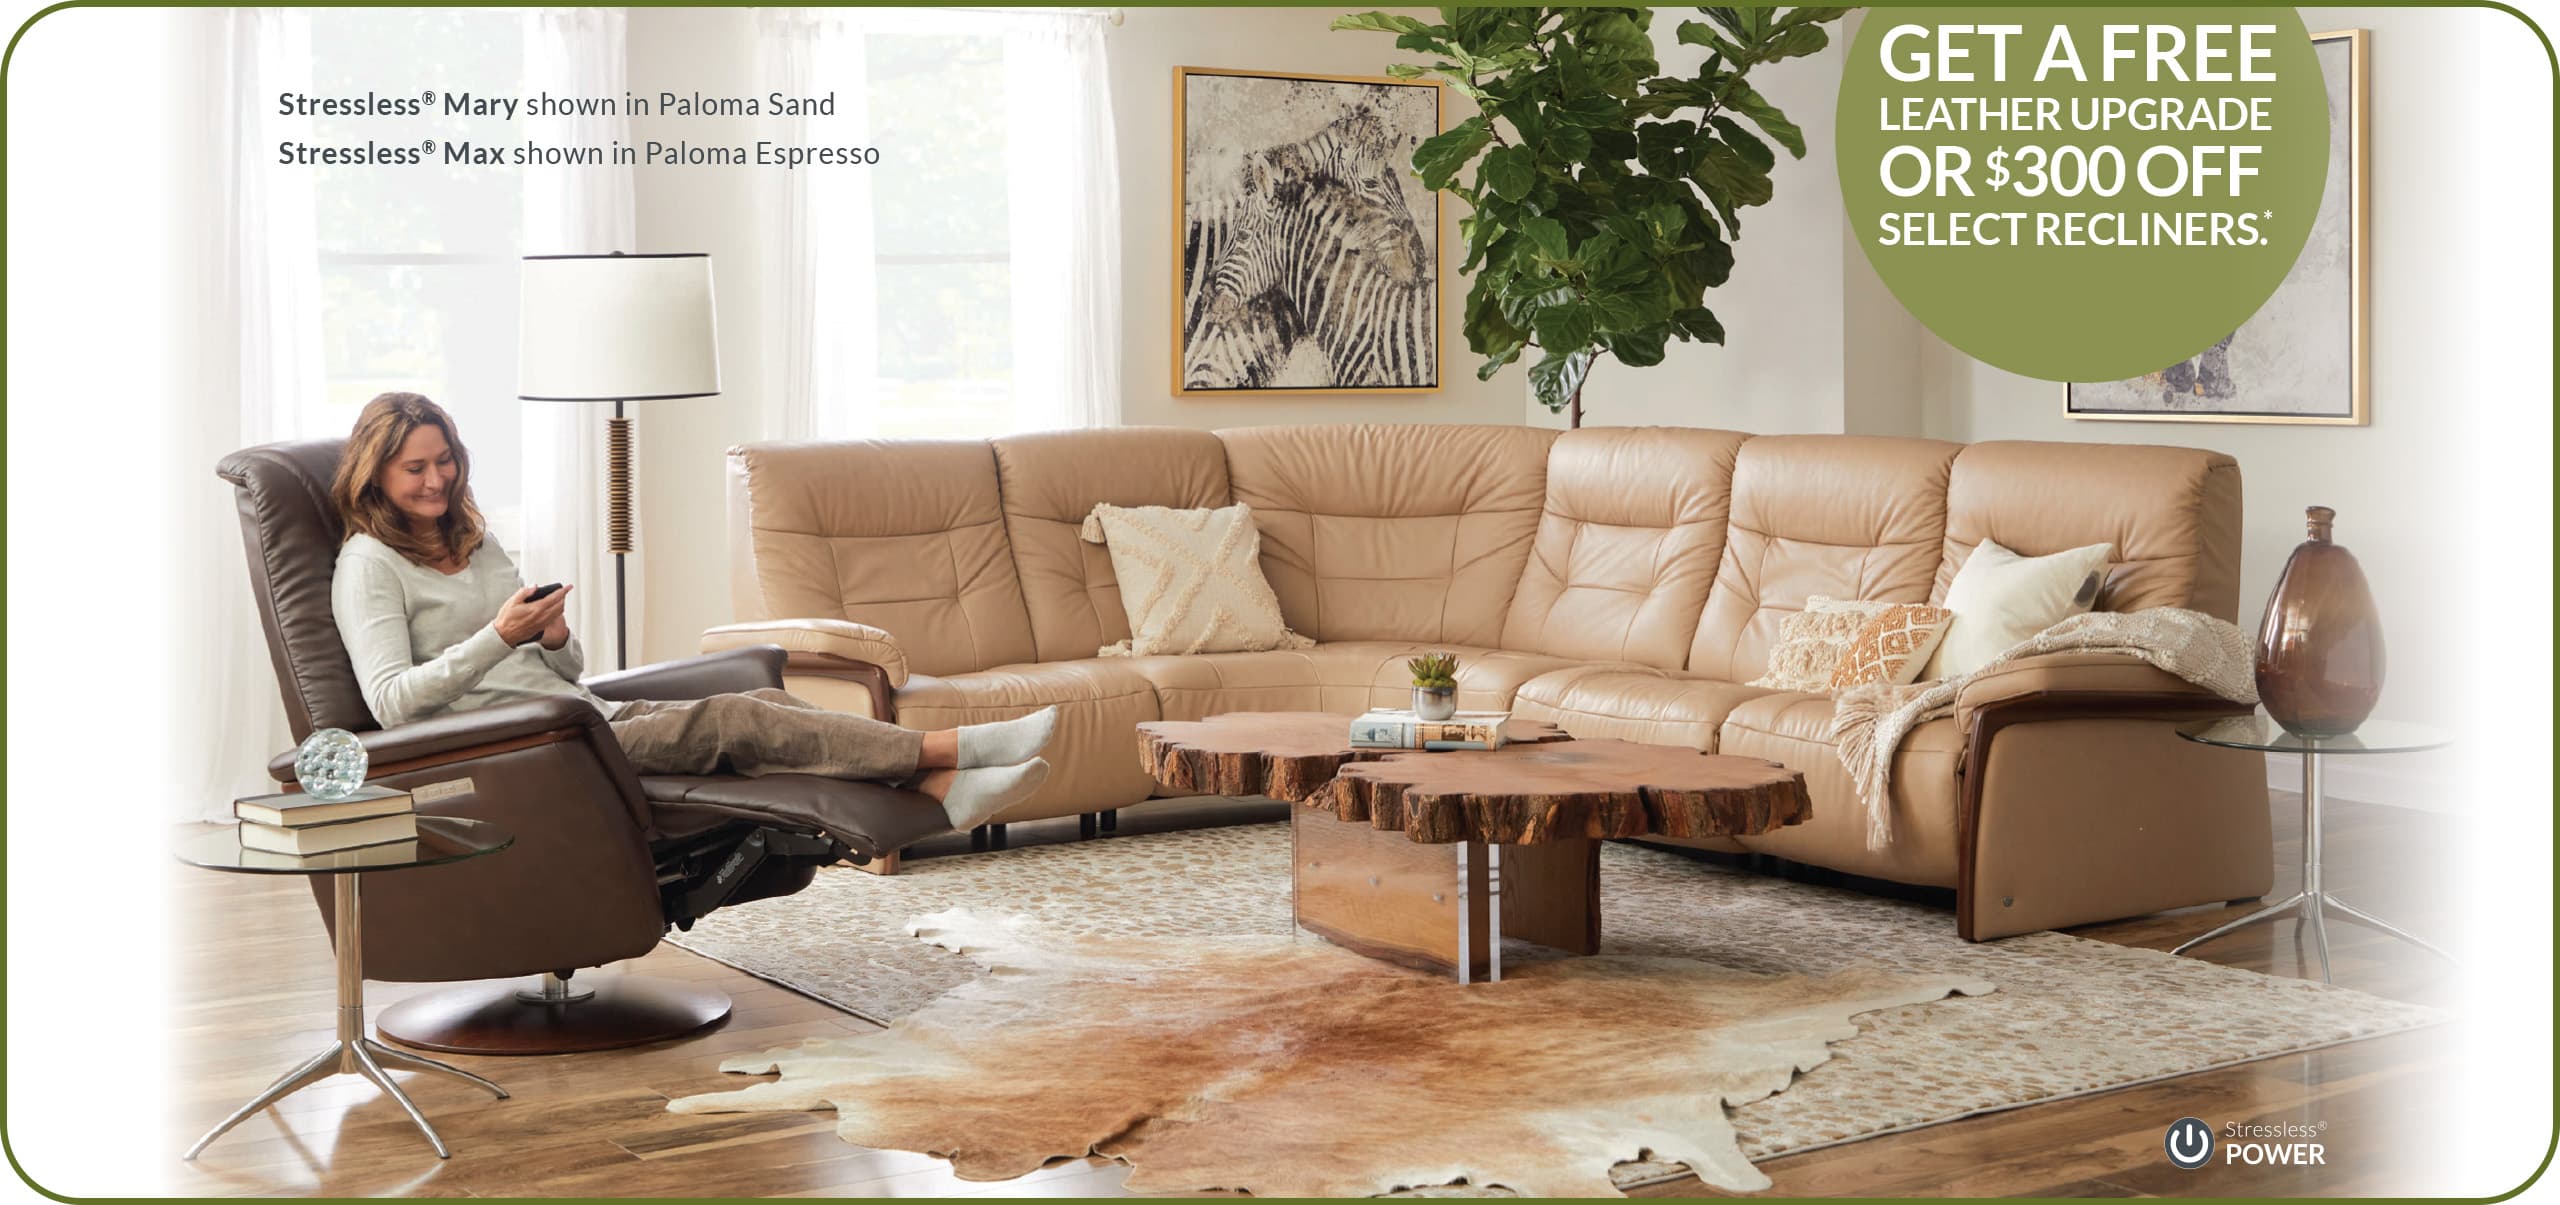 Stressless® Free Leather Upgrade Promo: get a free leather upgrade or save $300 on select recliners